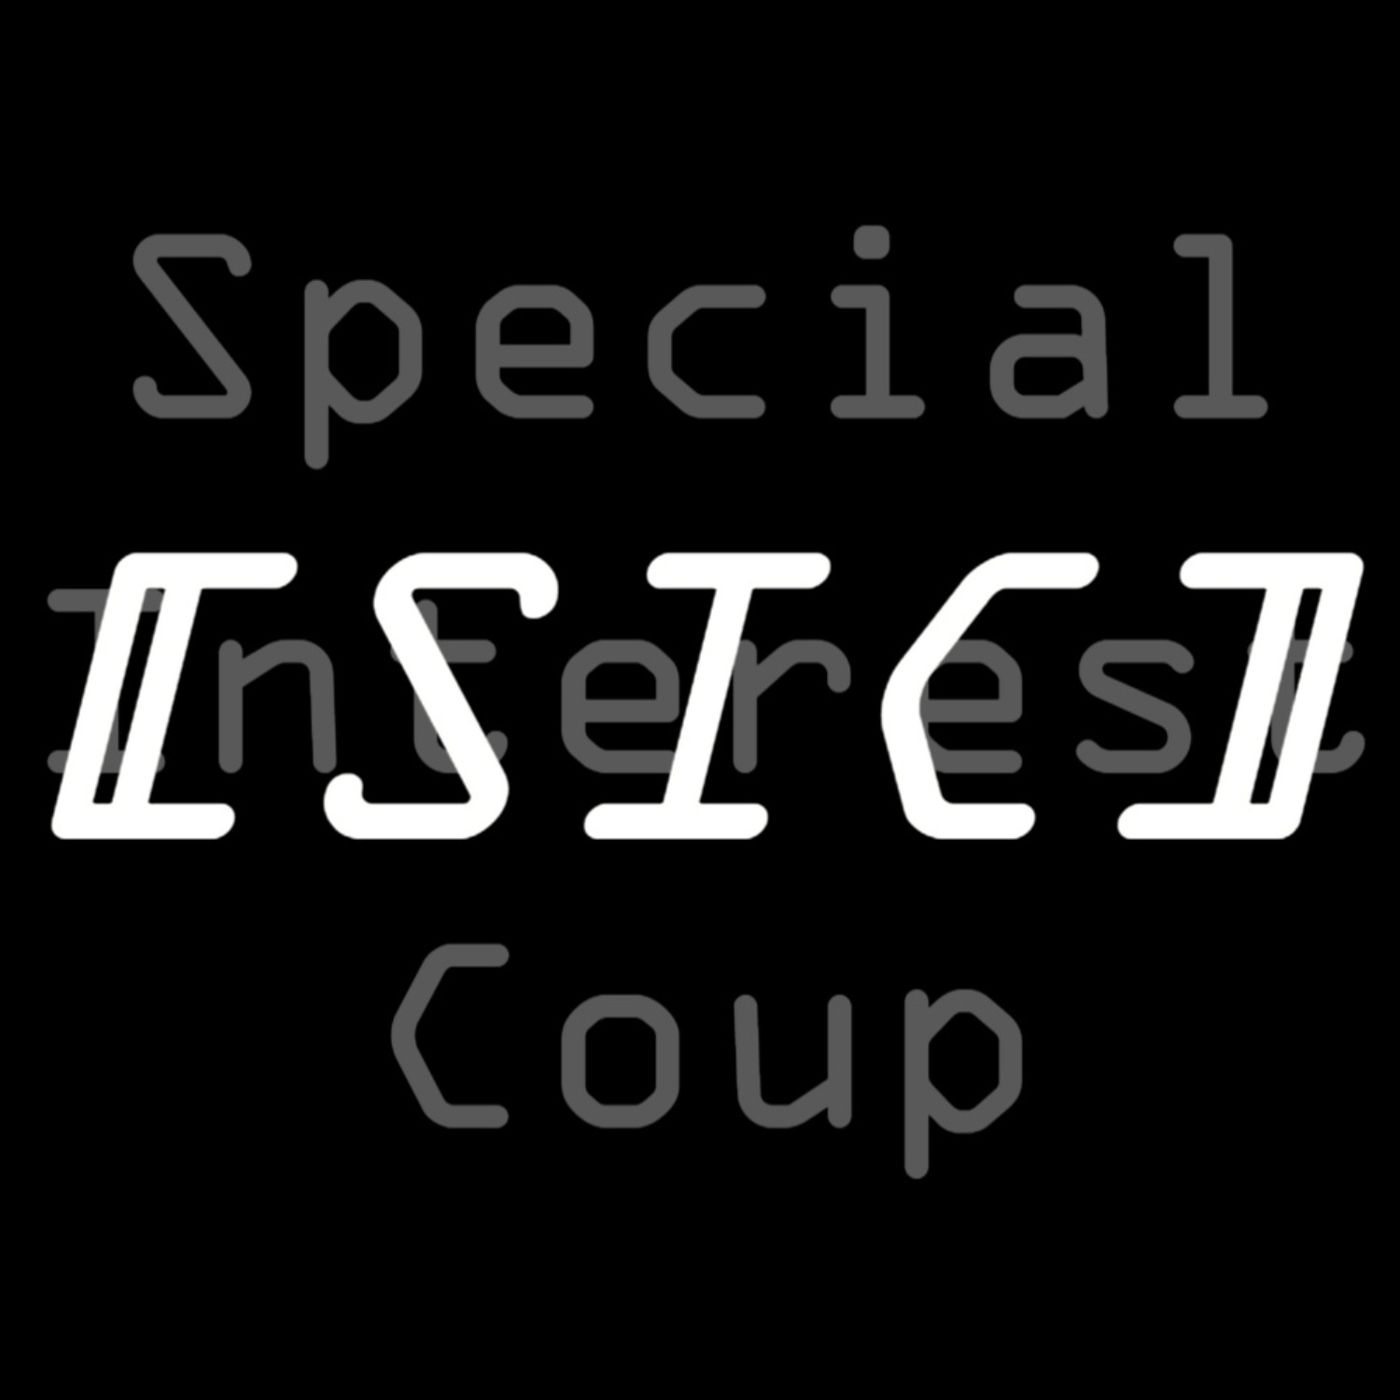 Special Interest Coup